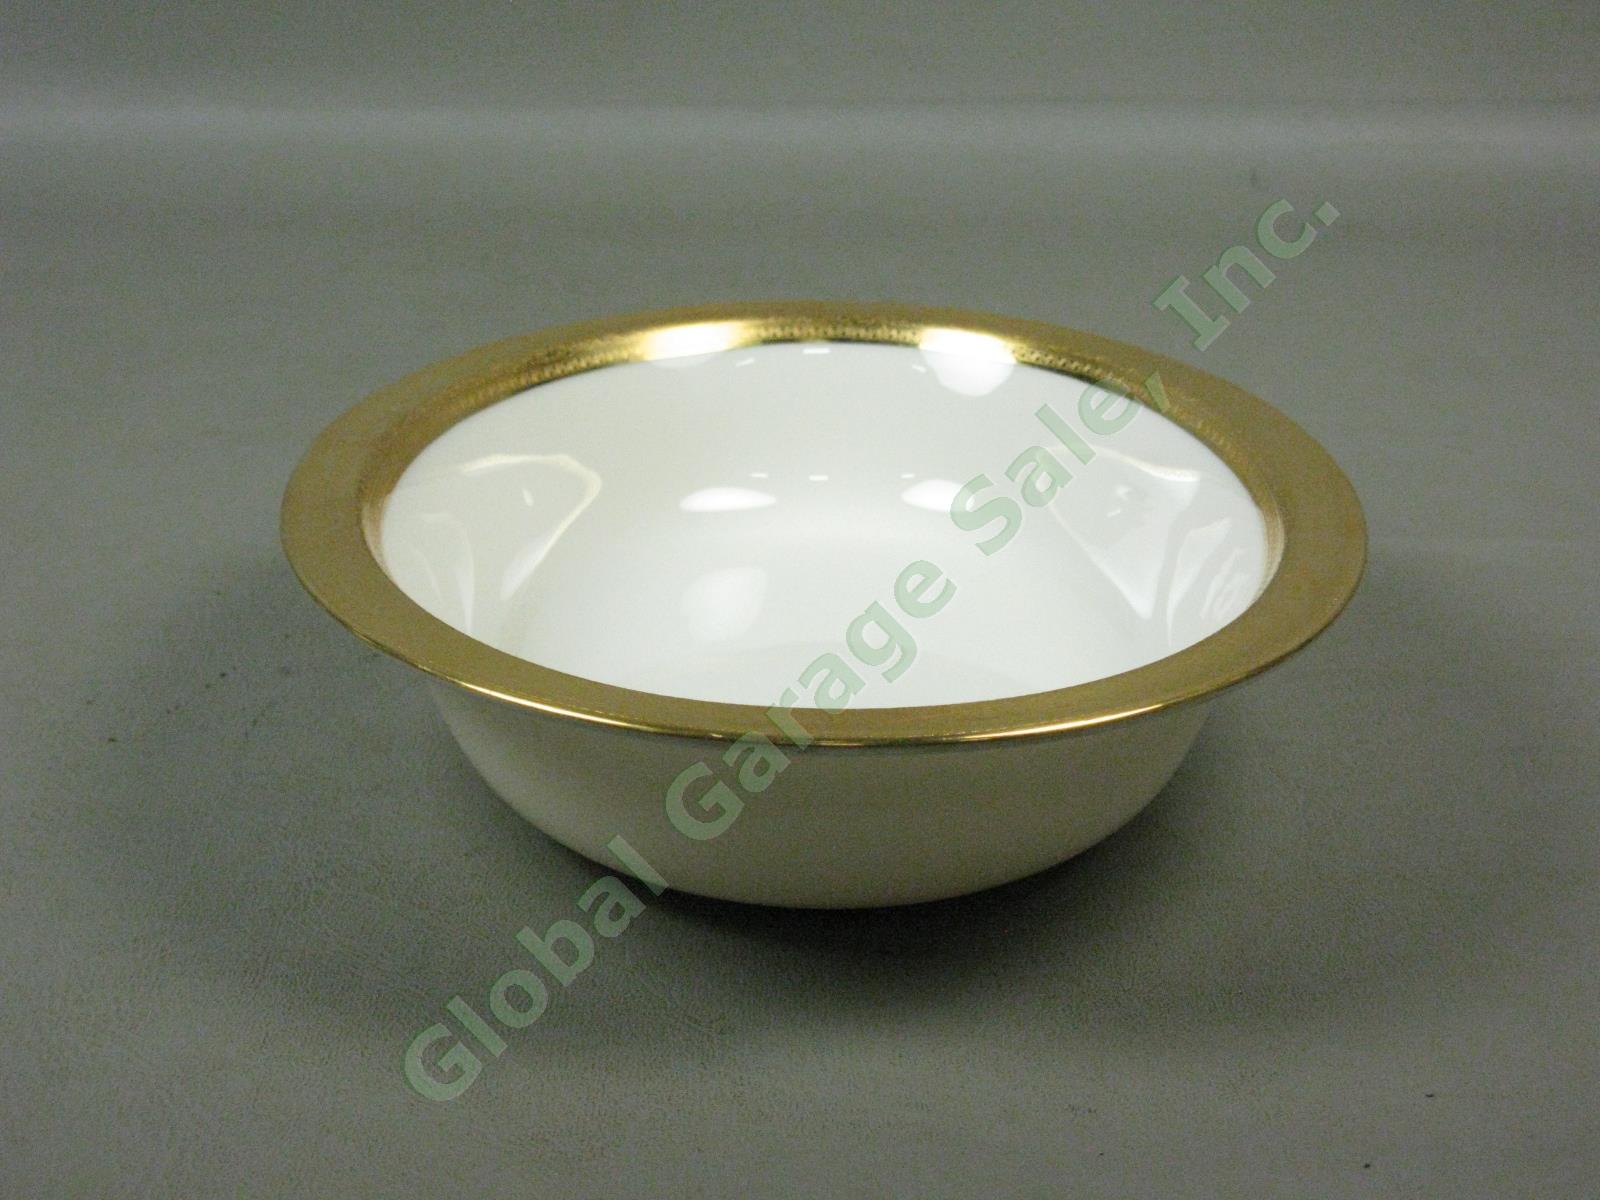 Lenox Westchester China M139 Presidential Gold Encrusted Oval 9" Vegetable Bowl 1